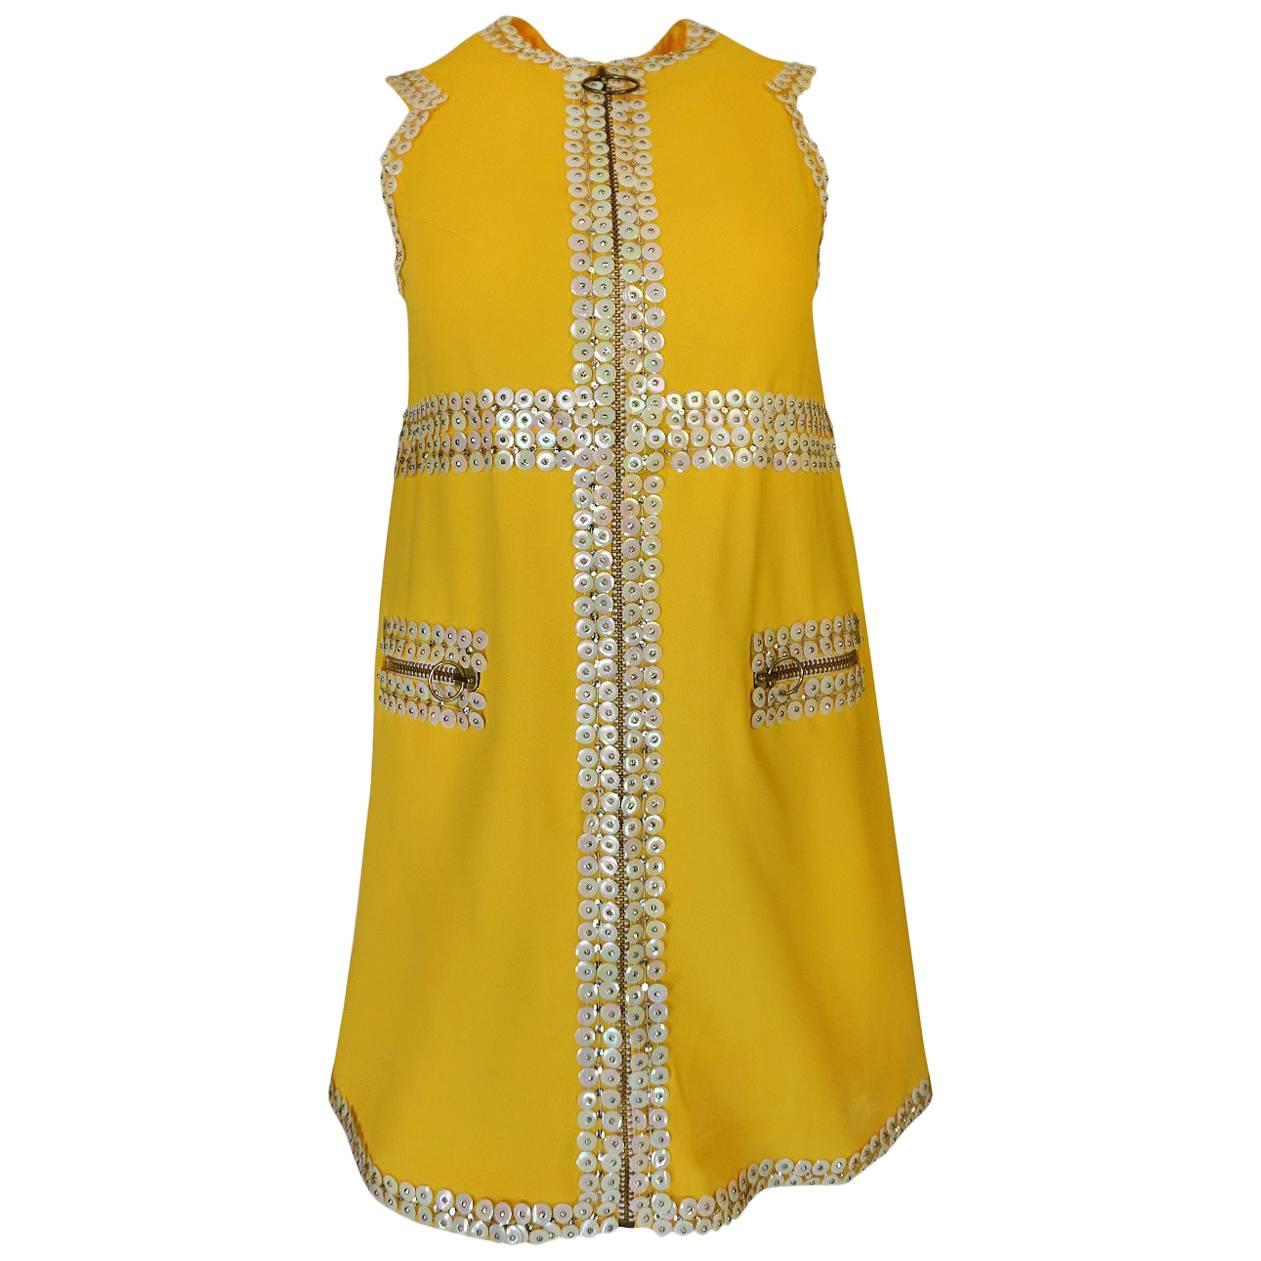 Chloe by Karl Lagerfeld Stud and Paillettes Yellow Mini Dress circa 1967